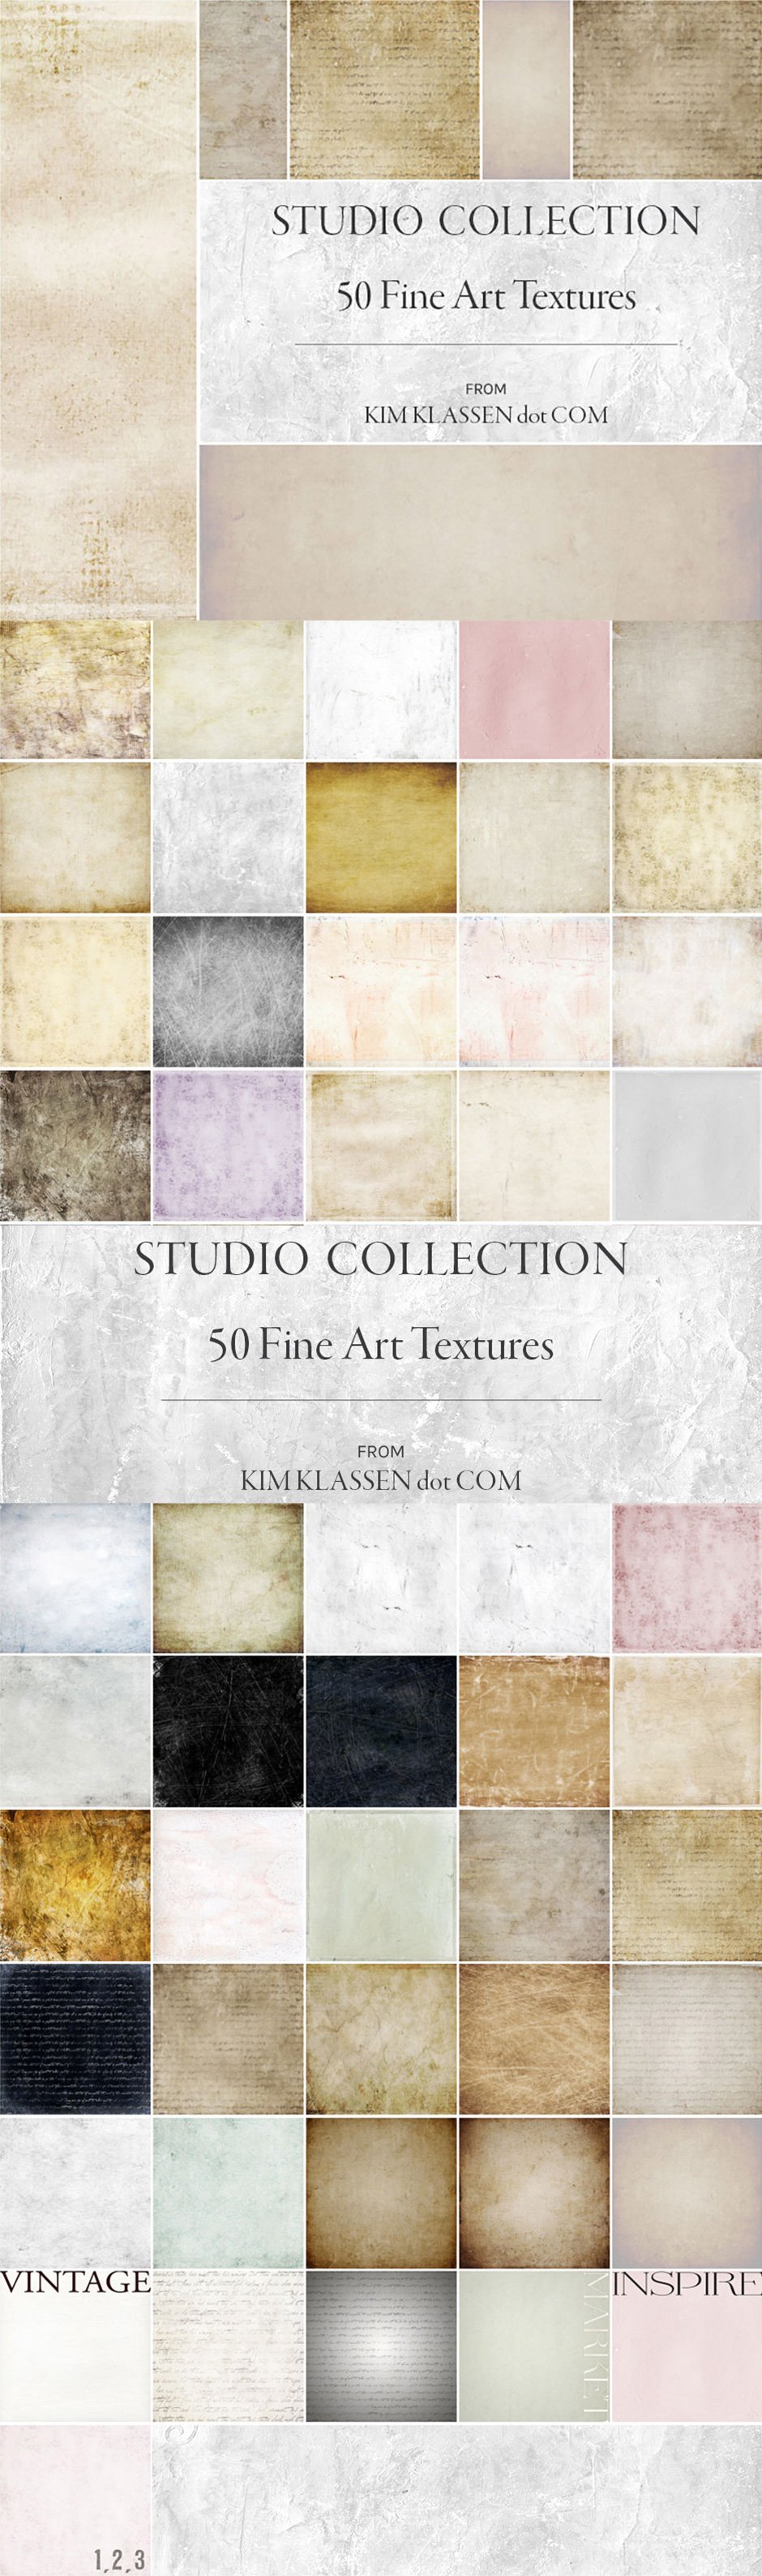 The Textures, Patterns and Backgrounds Ultimate Bundle